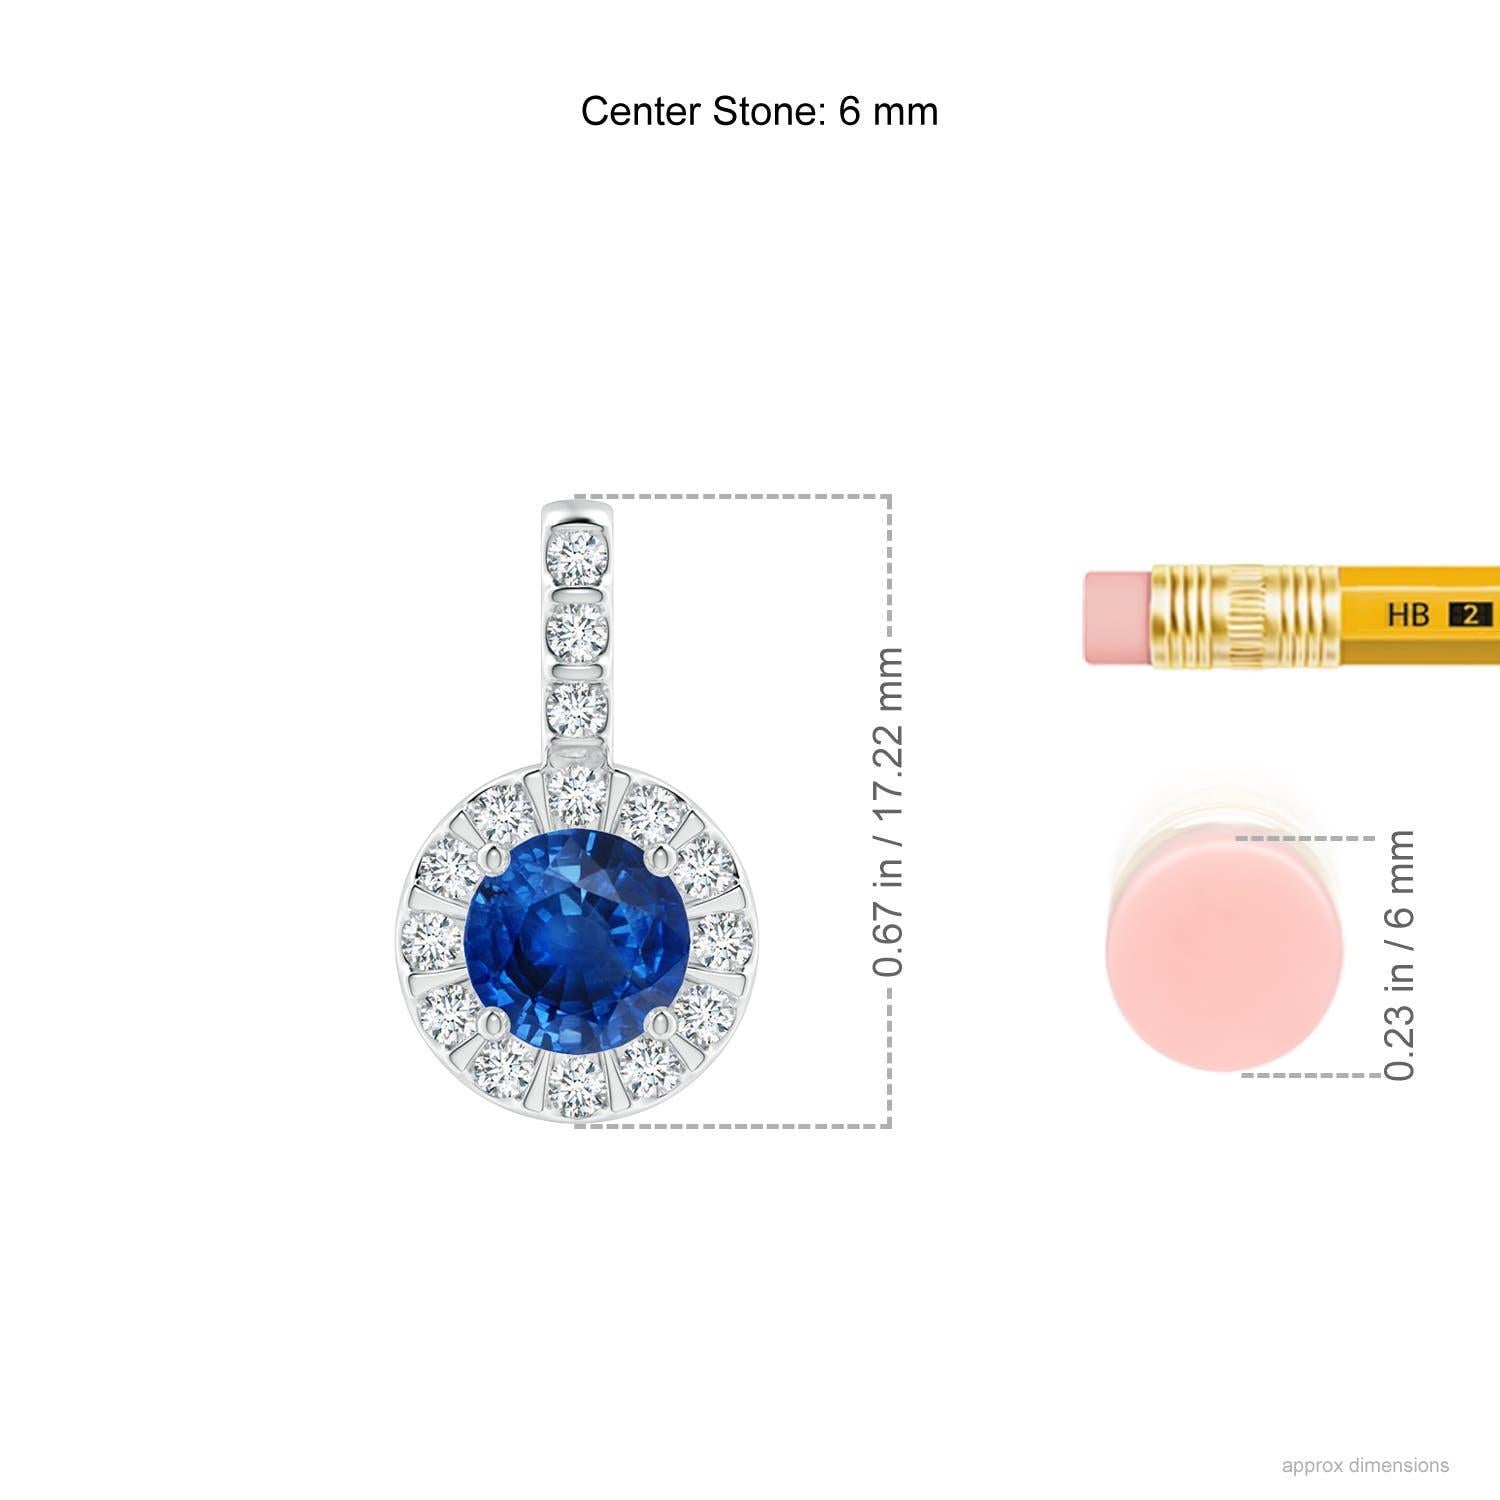 The prong set sapphire's dreamy blue color is enhanced by sparkling diamonds that surround it and adorn the bale. For a distinctive look, the diamonds are mounted in a bar setting. This elegant and stylish sapphire halo pendant is sculpted in